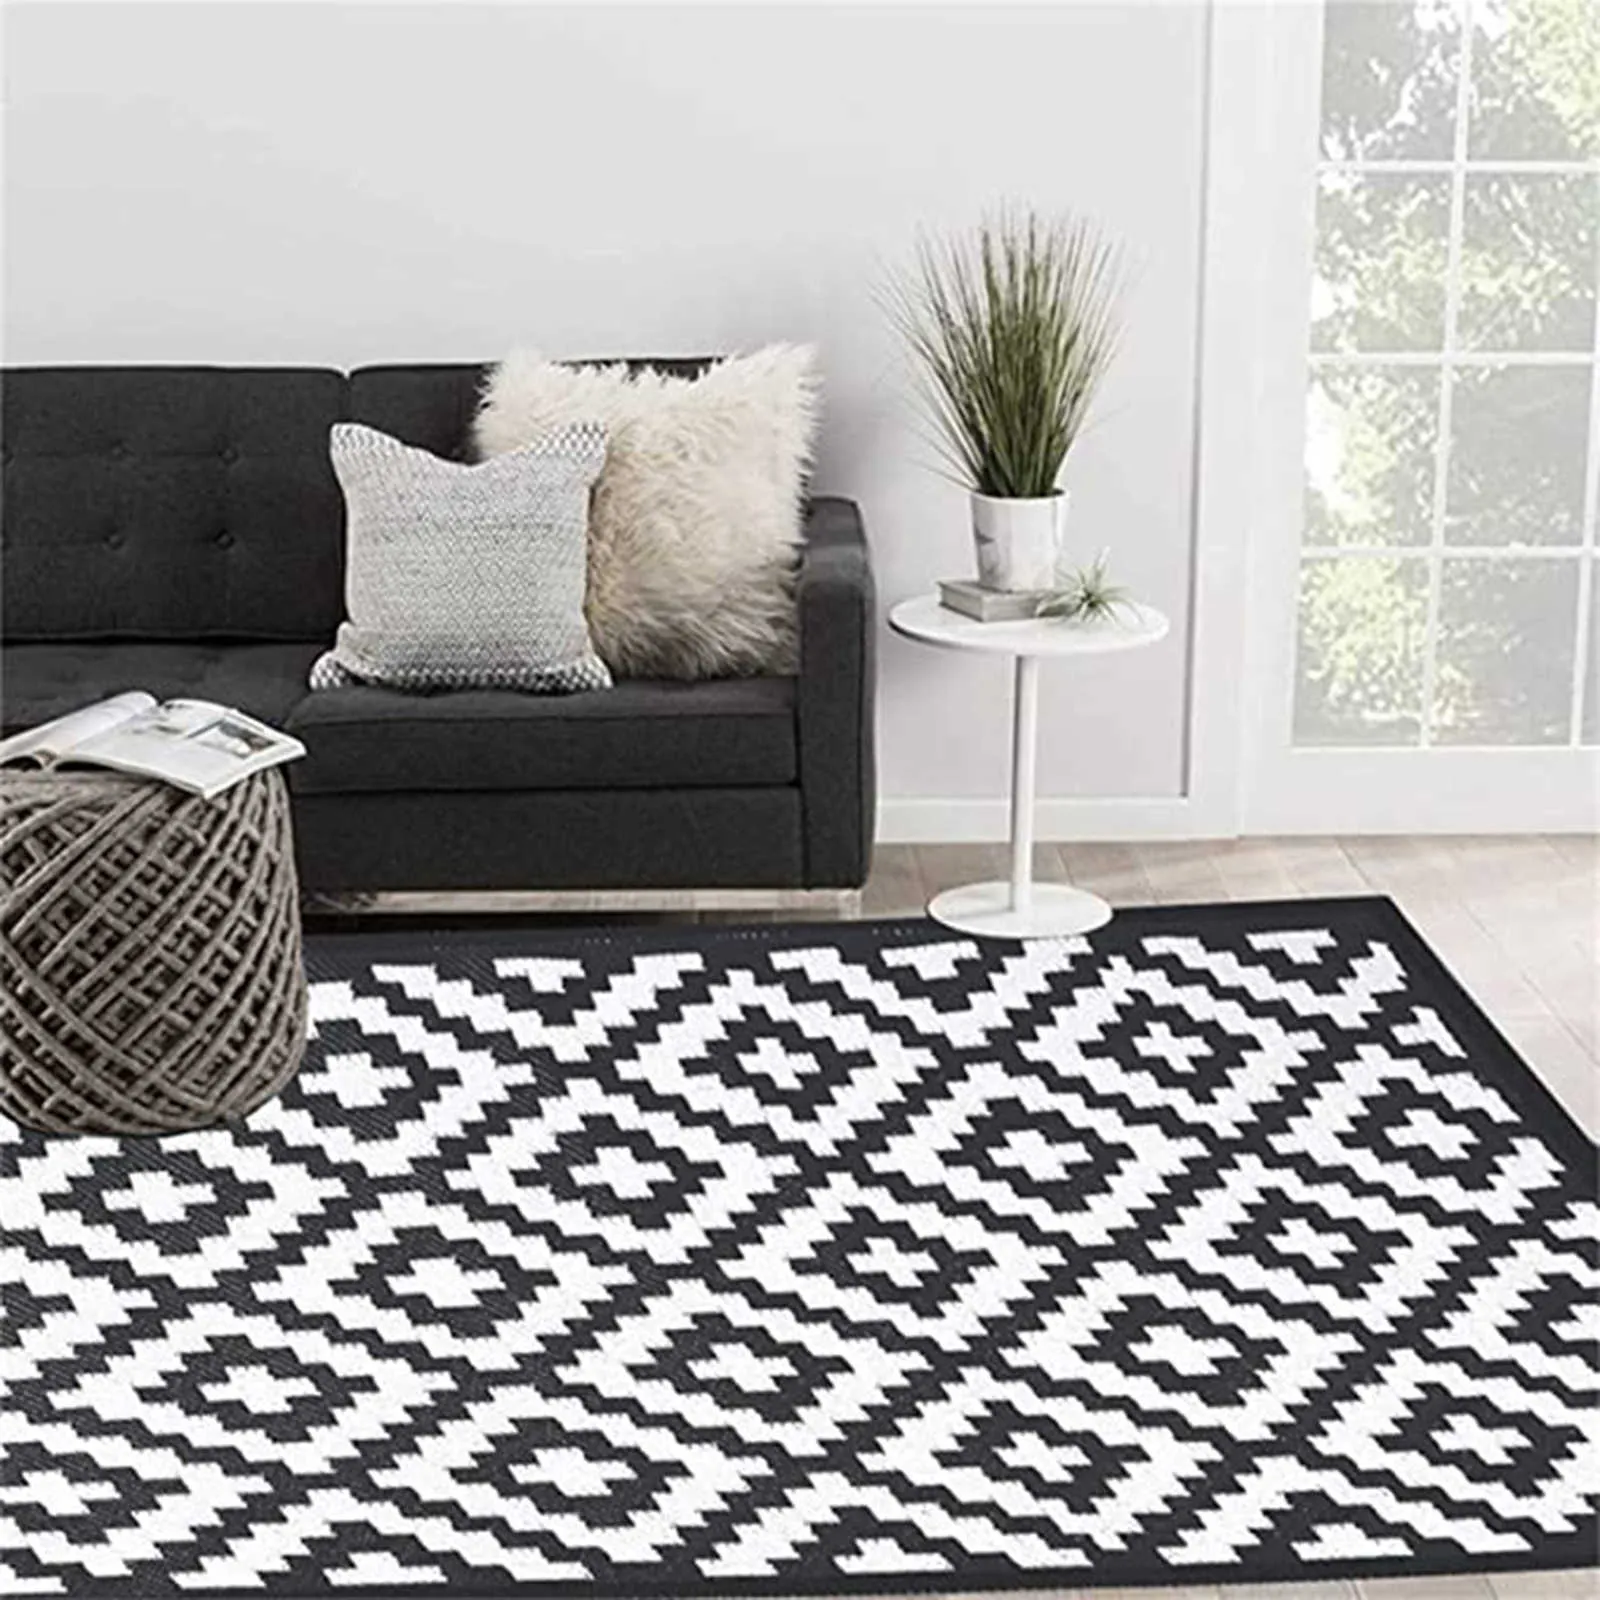 Non-slip Rug for Outdoor Patio Portable Woven Picnic Mat Easy Cleaning  Reversible Carpet Multifunctional Floor